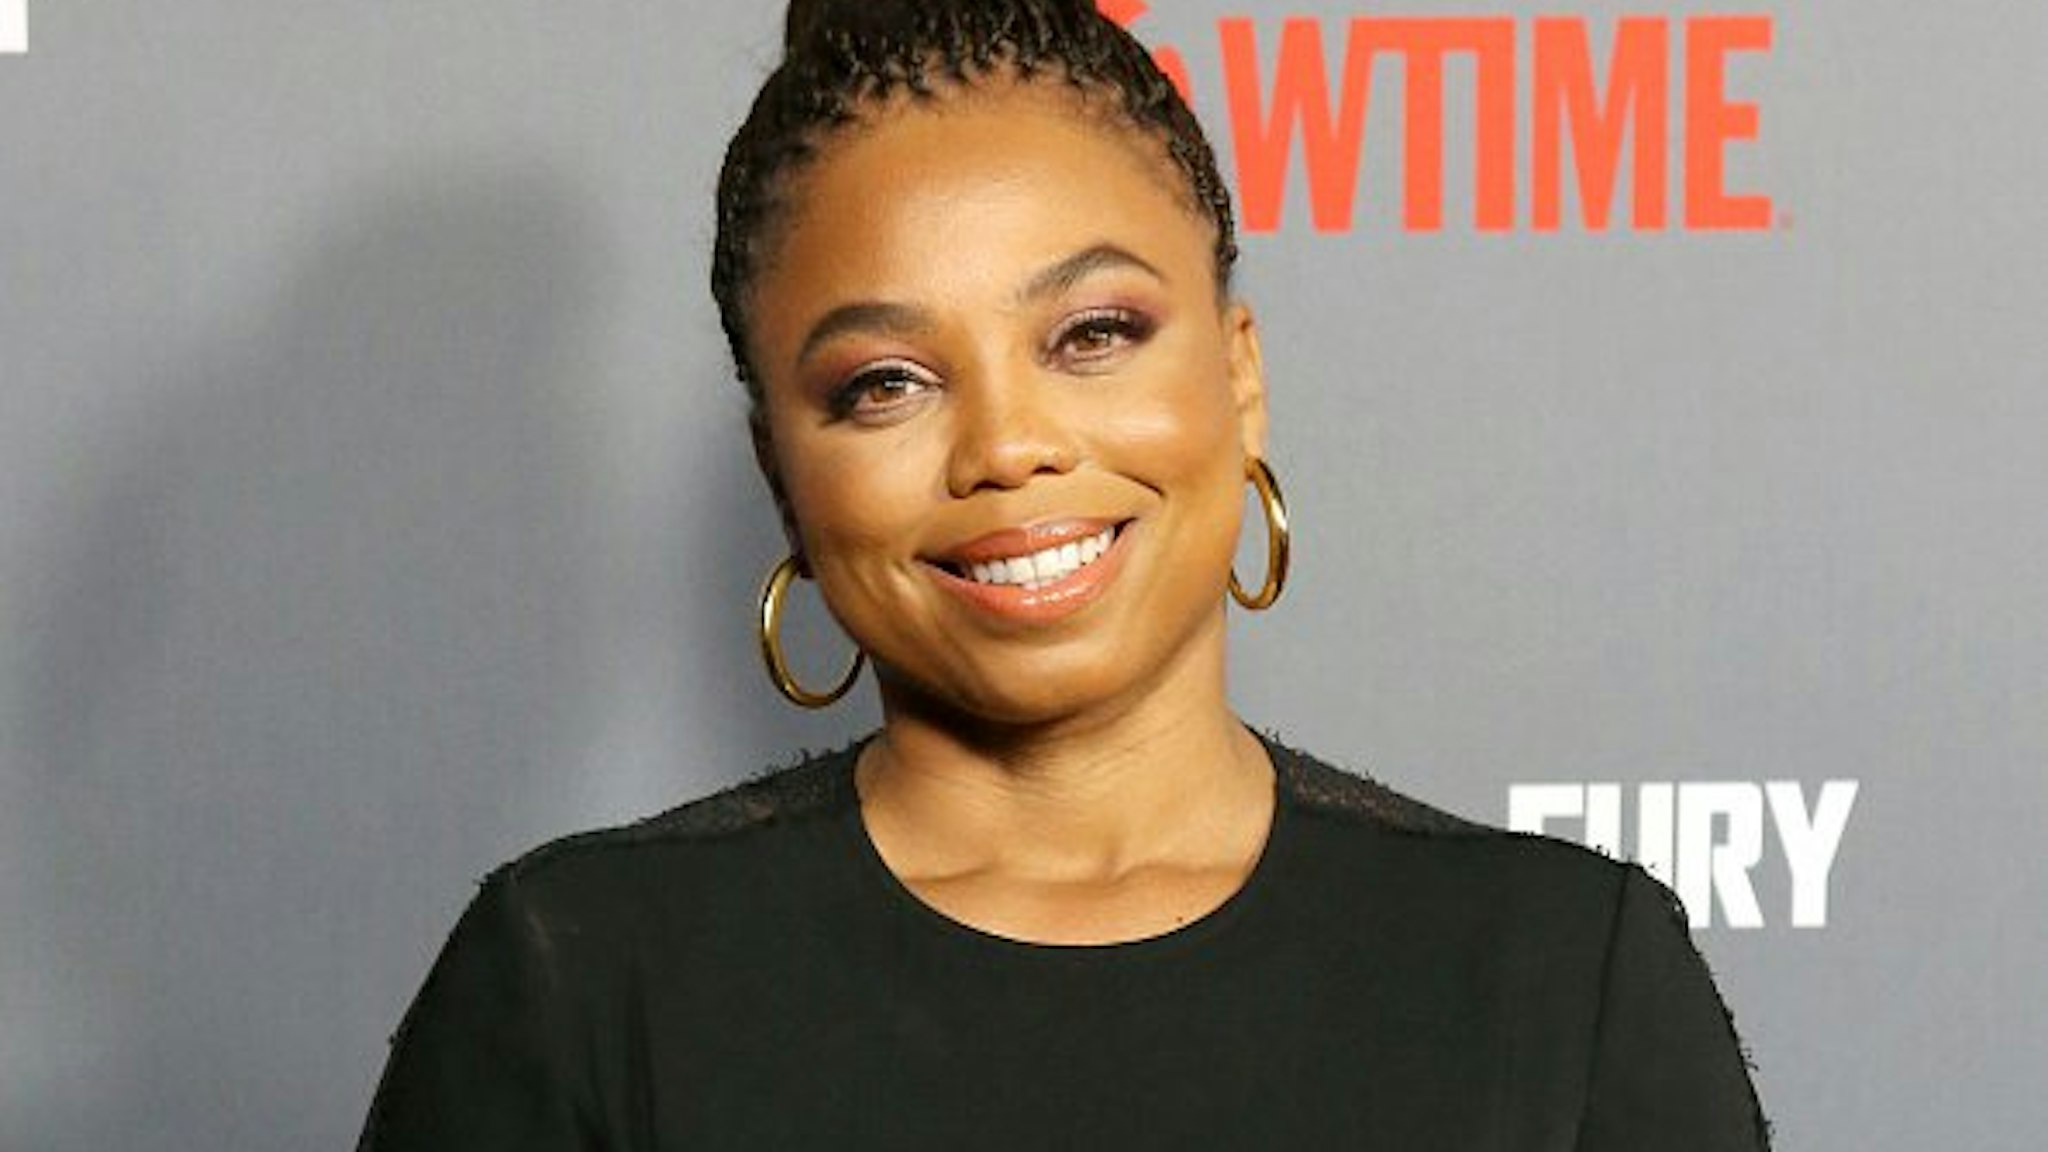 Jemele Hill arrives to the Heavyweight Championship of The World "Wilder vs. Fury" Premiere held at Staples Center on December 01, 2018 in Los Angeles, California.